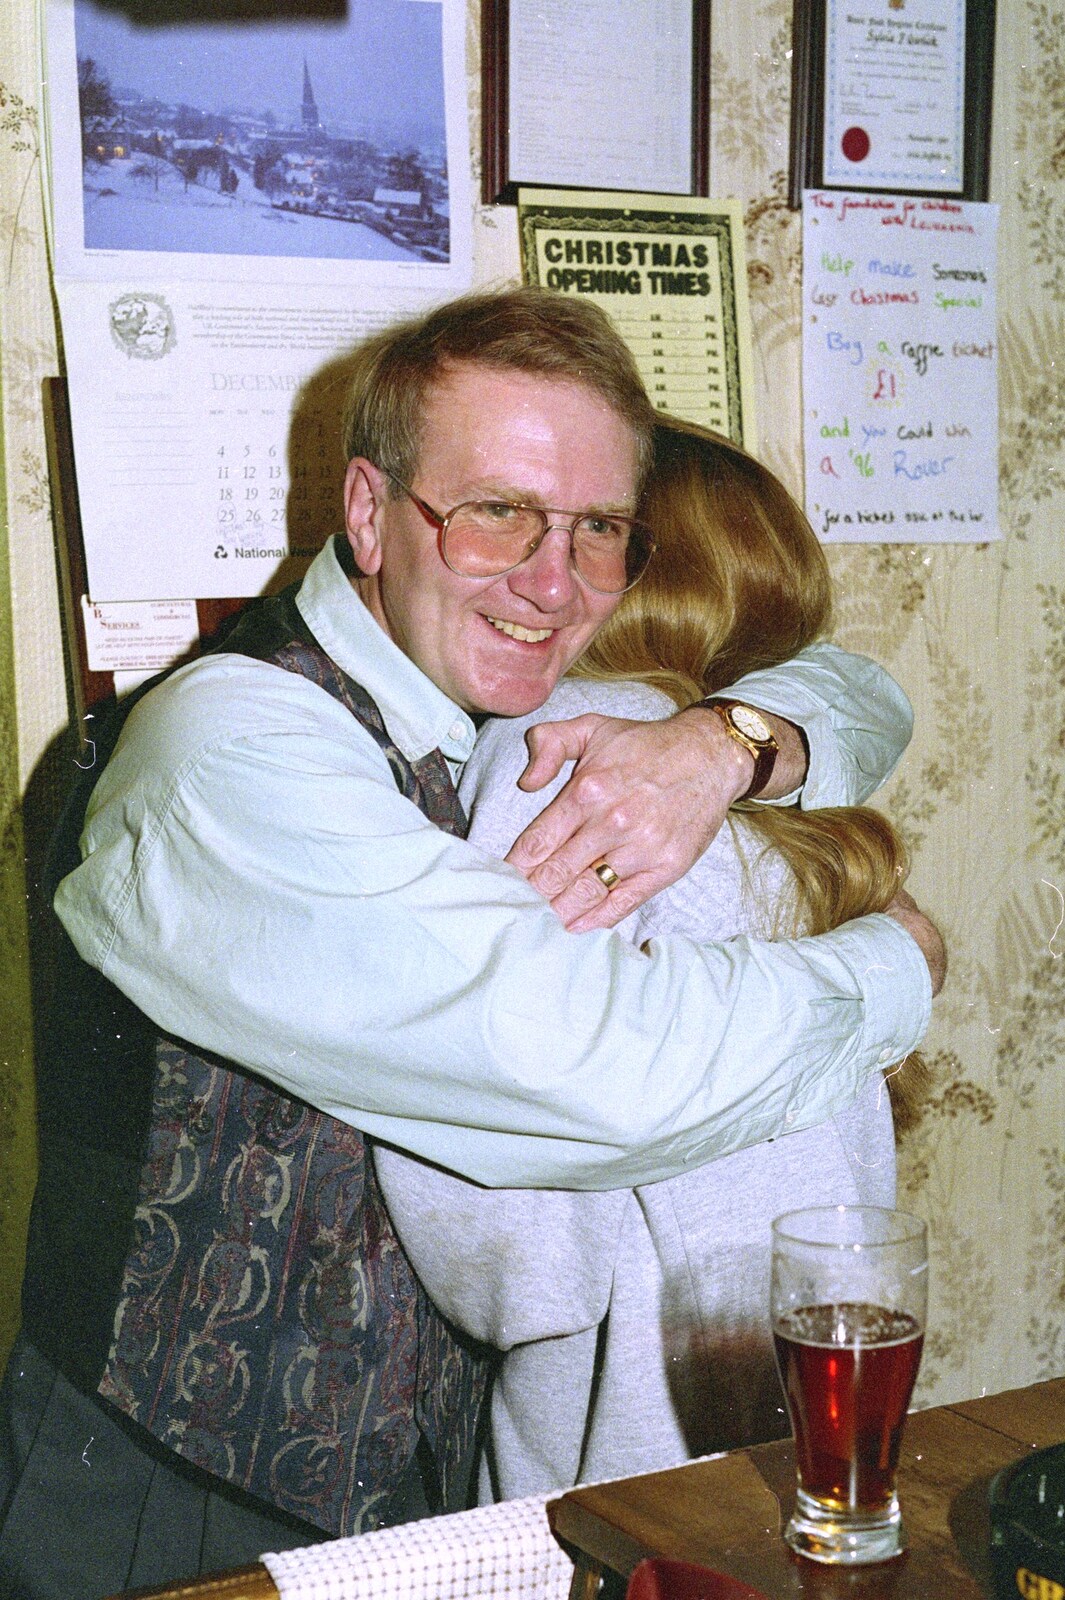 John gives Lorraine a hug from New Year's Eve in the Swan Inn, Brome, Suffolk - 31st December 1995